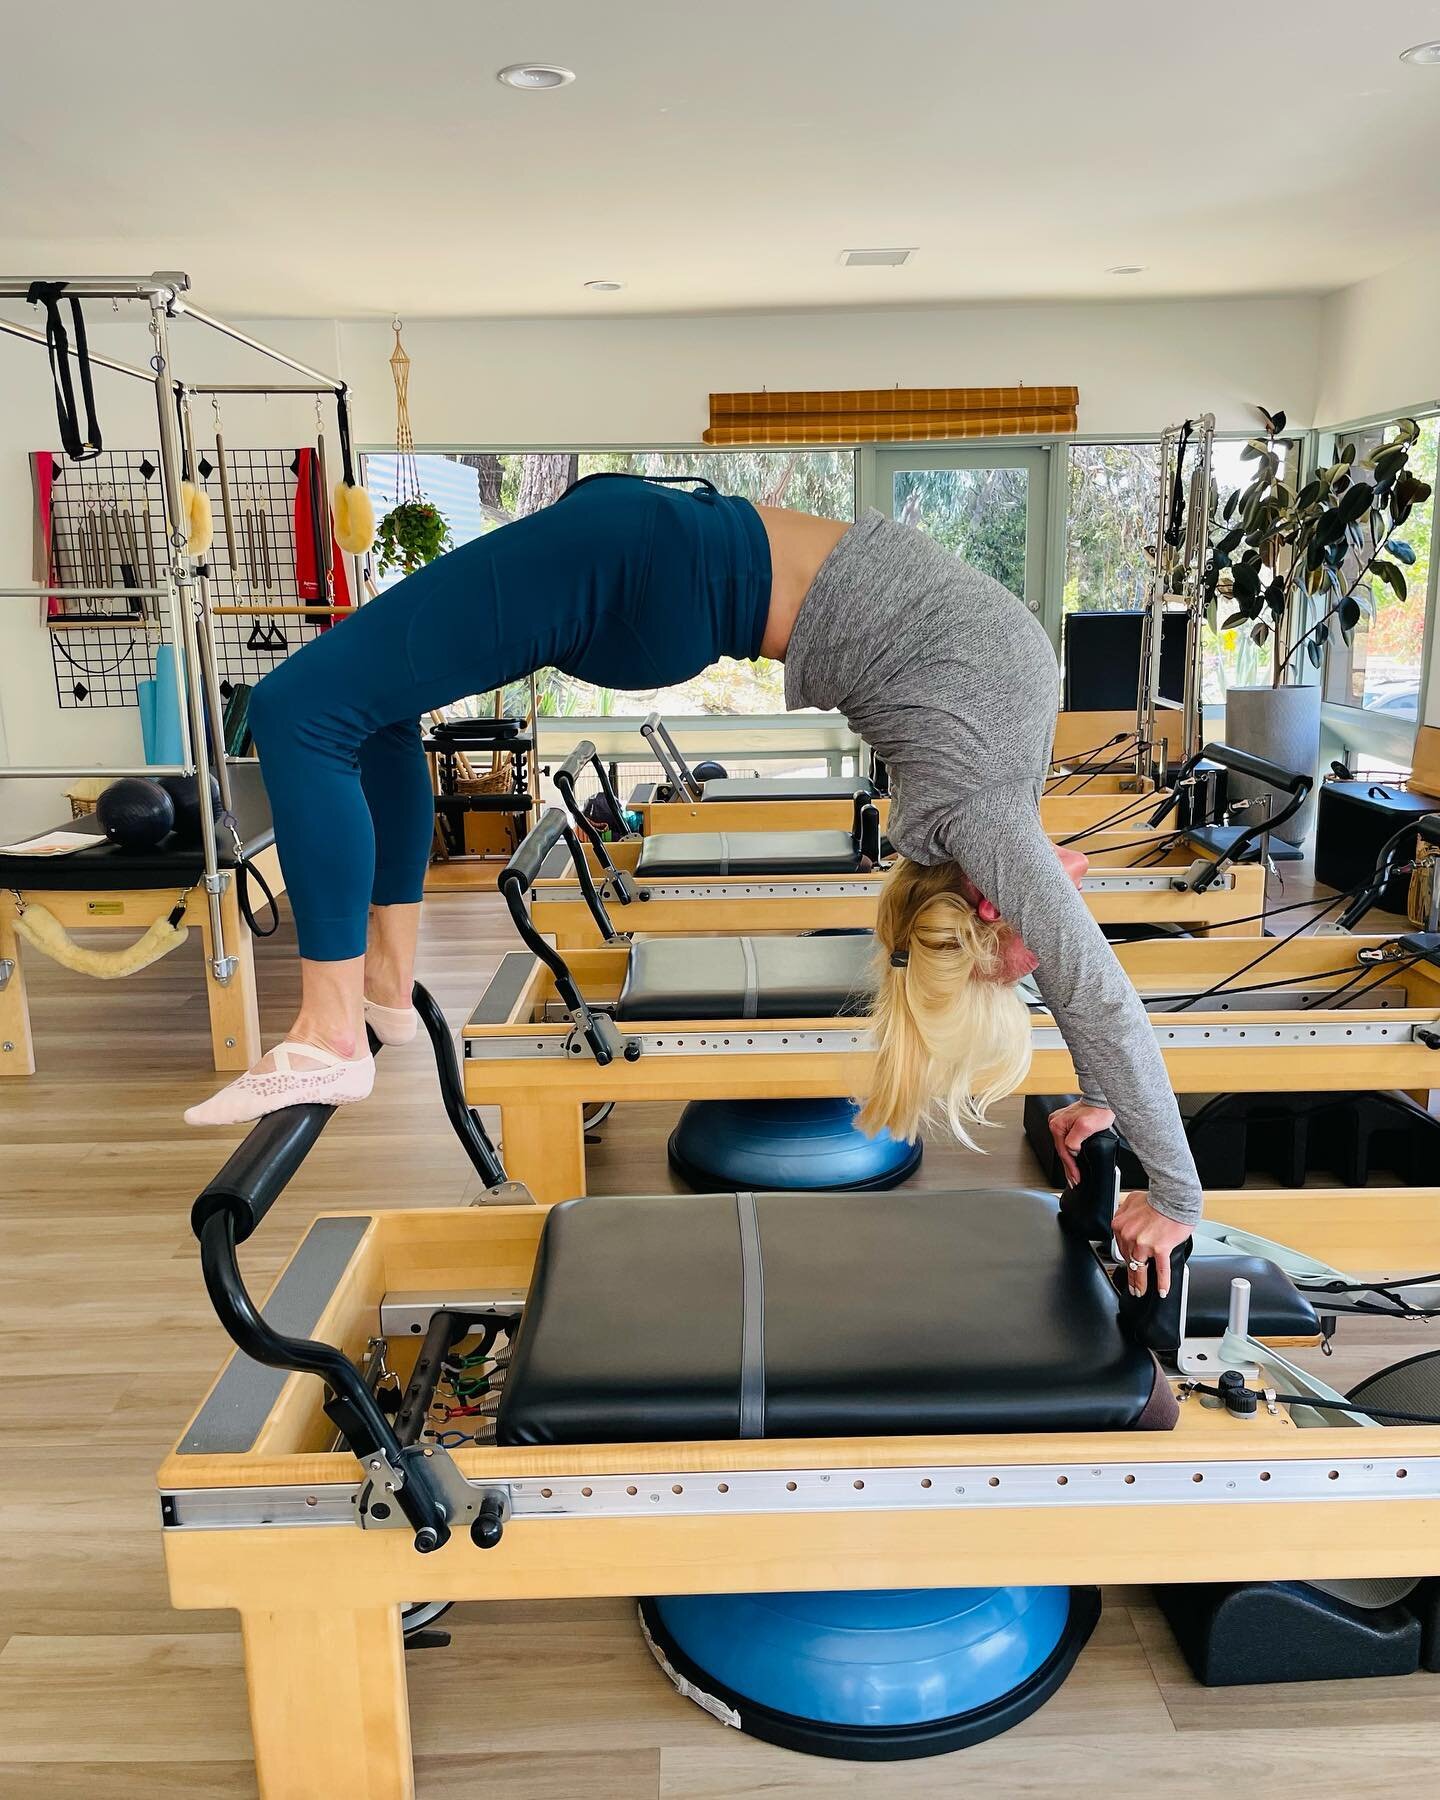 Wow wow wow - just beautiful! Love working with you @k_lykk &hearts;️ Pilates is art! #bulatesmalibu #bulates #pilates #highbridge #amazing #beautiful #malibu #flexibility #strength #passion #perseverance #live #life #love #&hearts;️